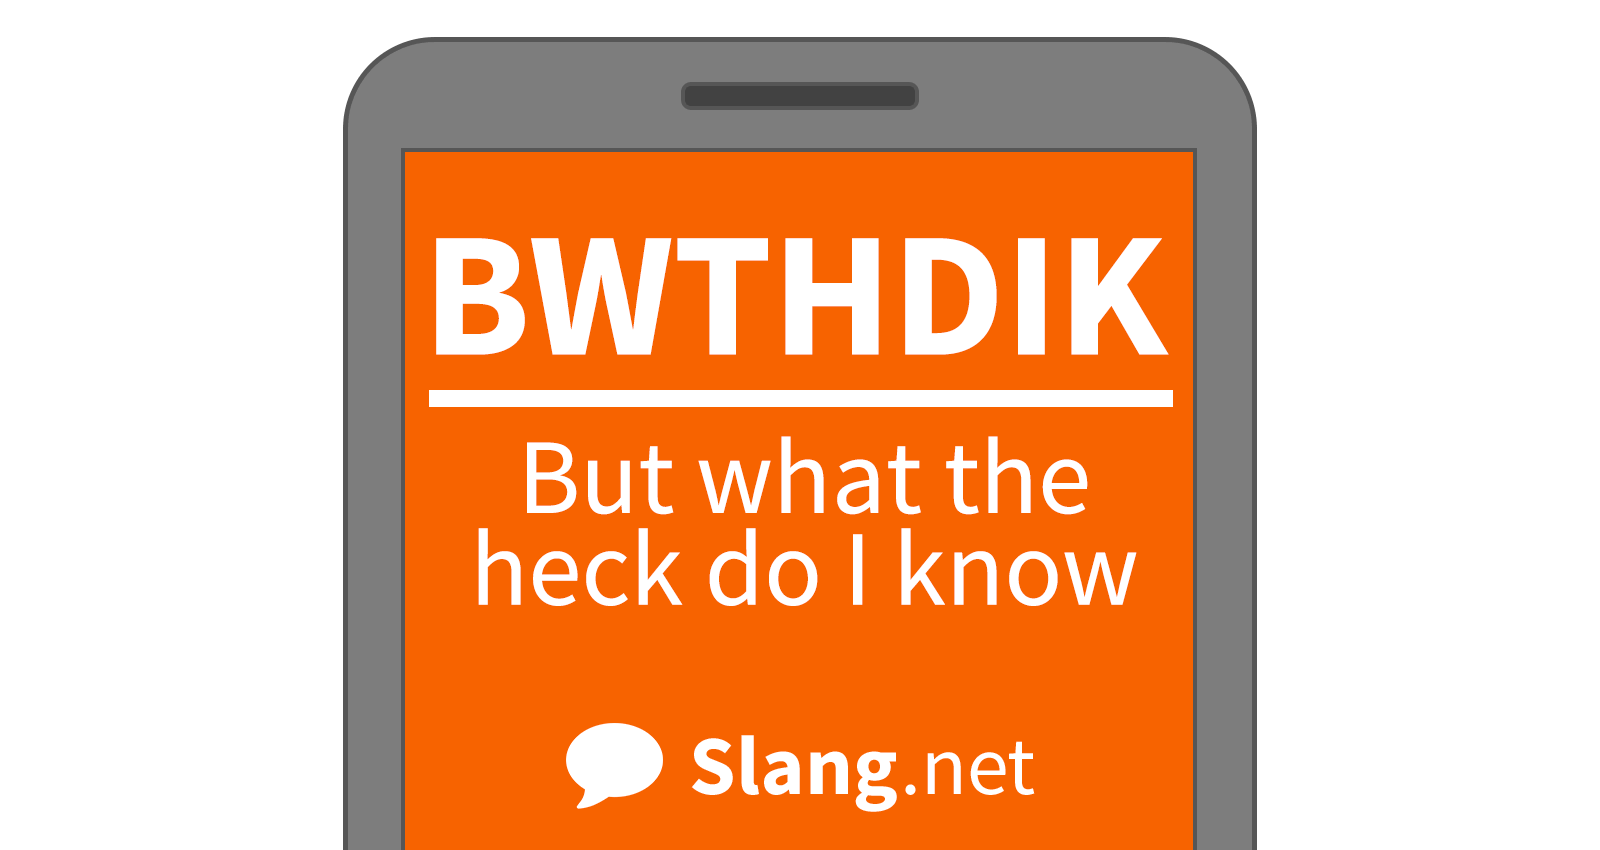 You will likely see BWTHDIK online and in texts